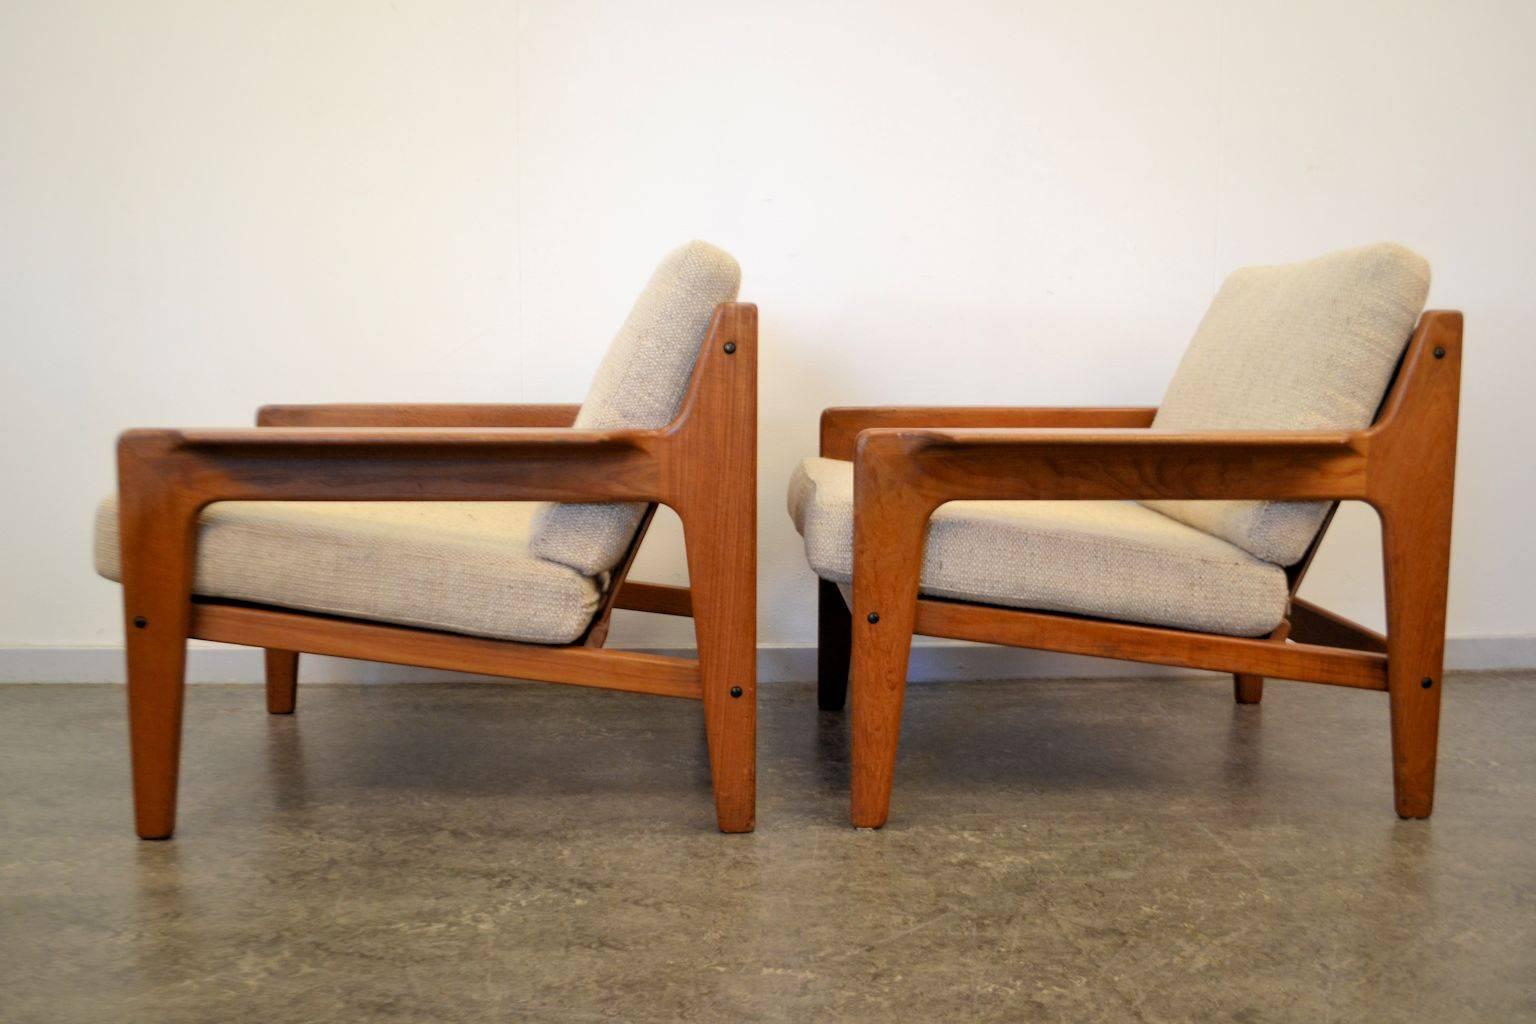 Danish design teak pair of lounge chairs designed by Arne Wahl Iversen for Komfort Denmark in late 1960s. The chairs are beautiful shaped and have crème fabric cushions with zippers.